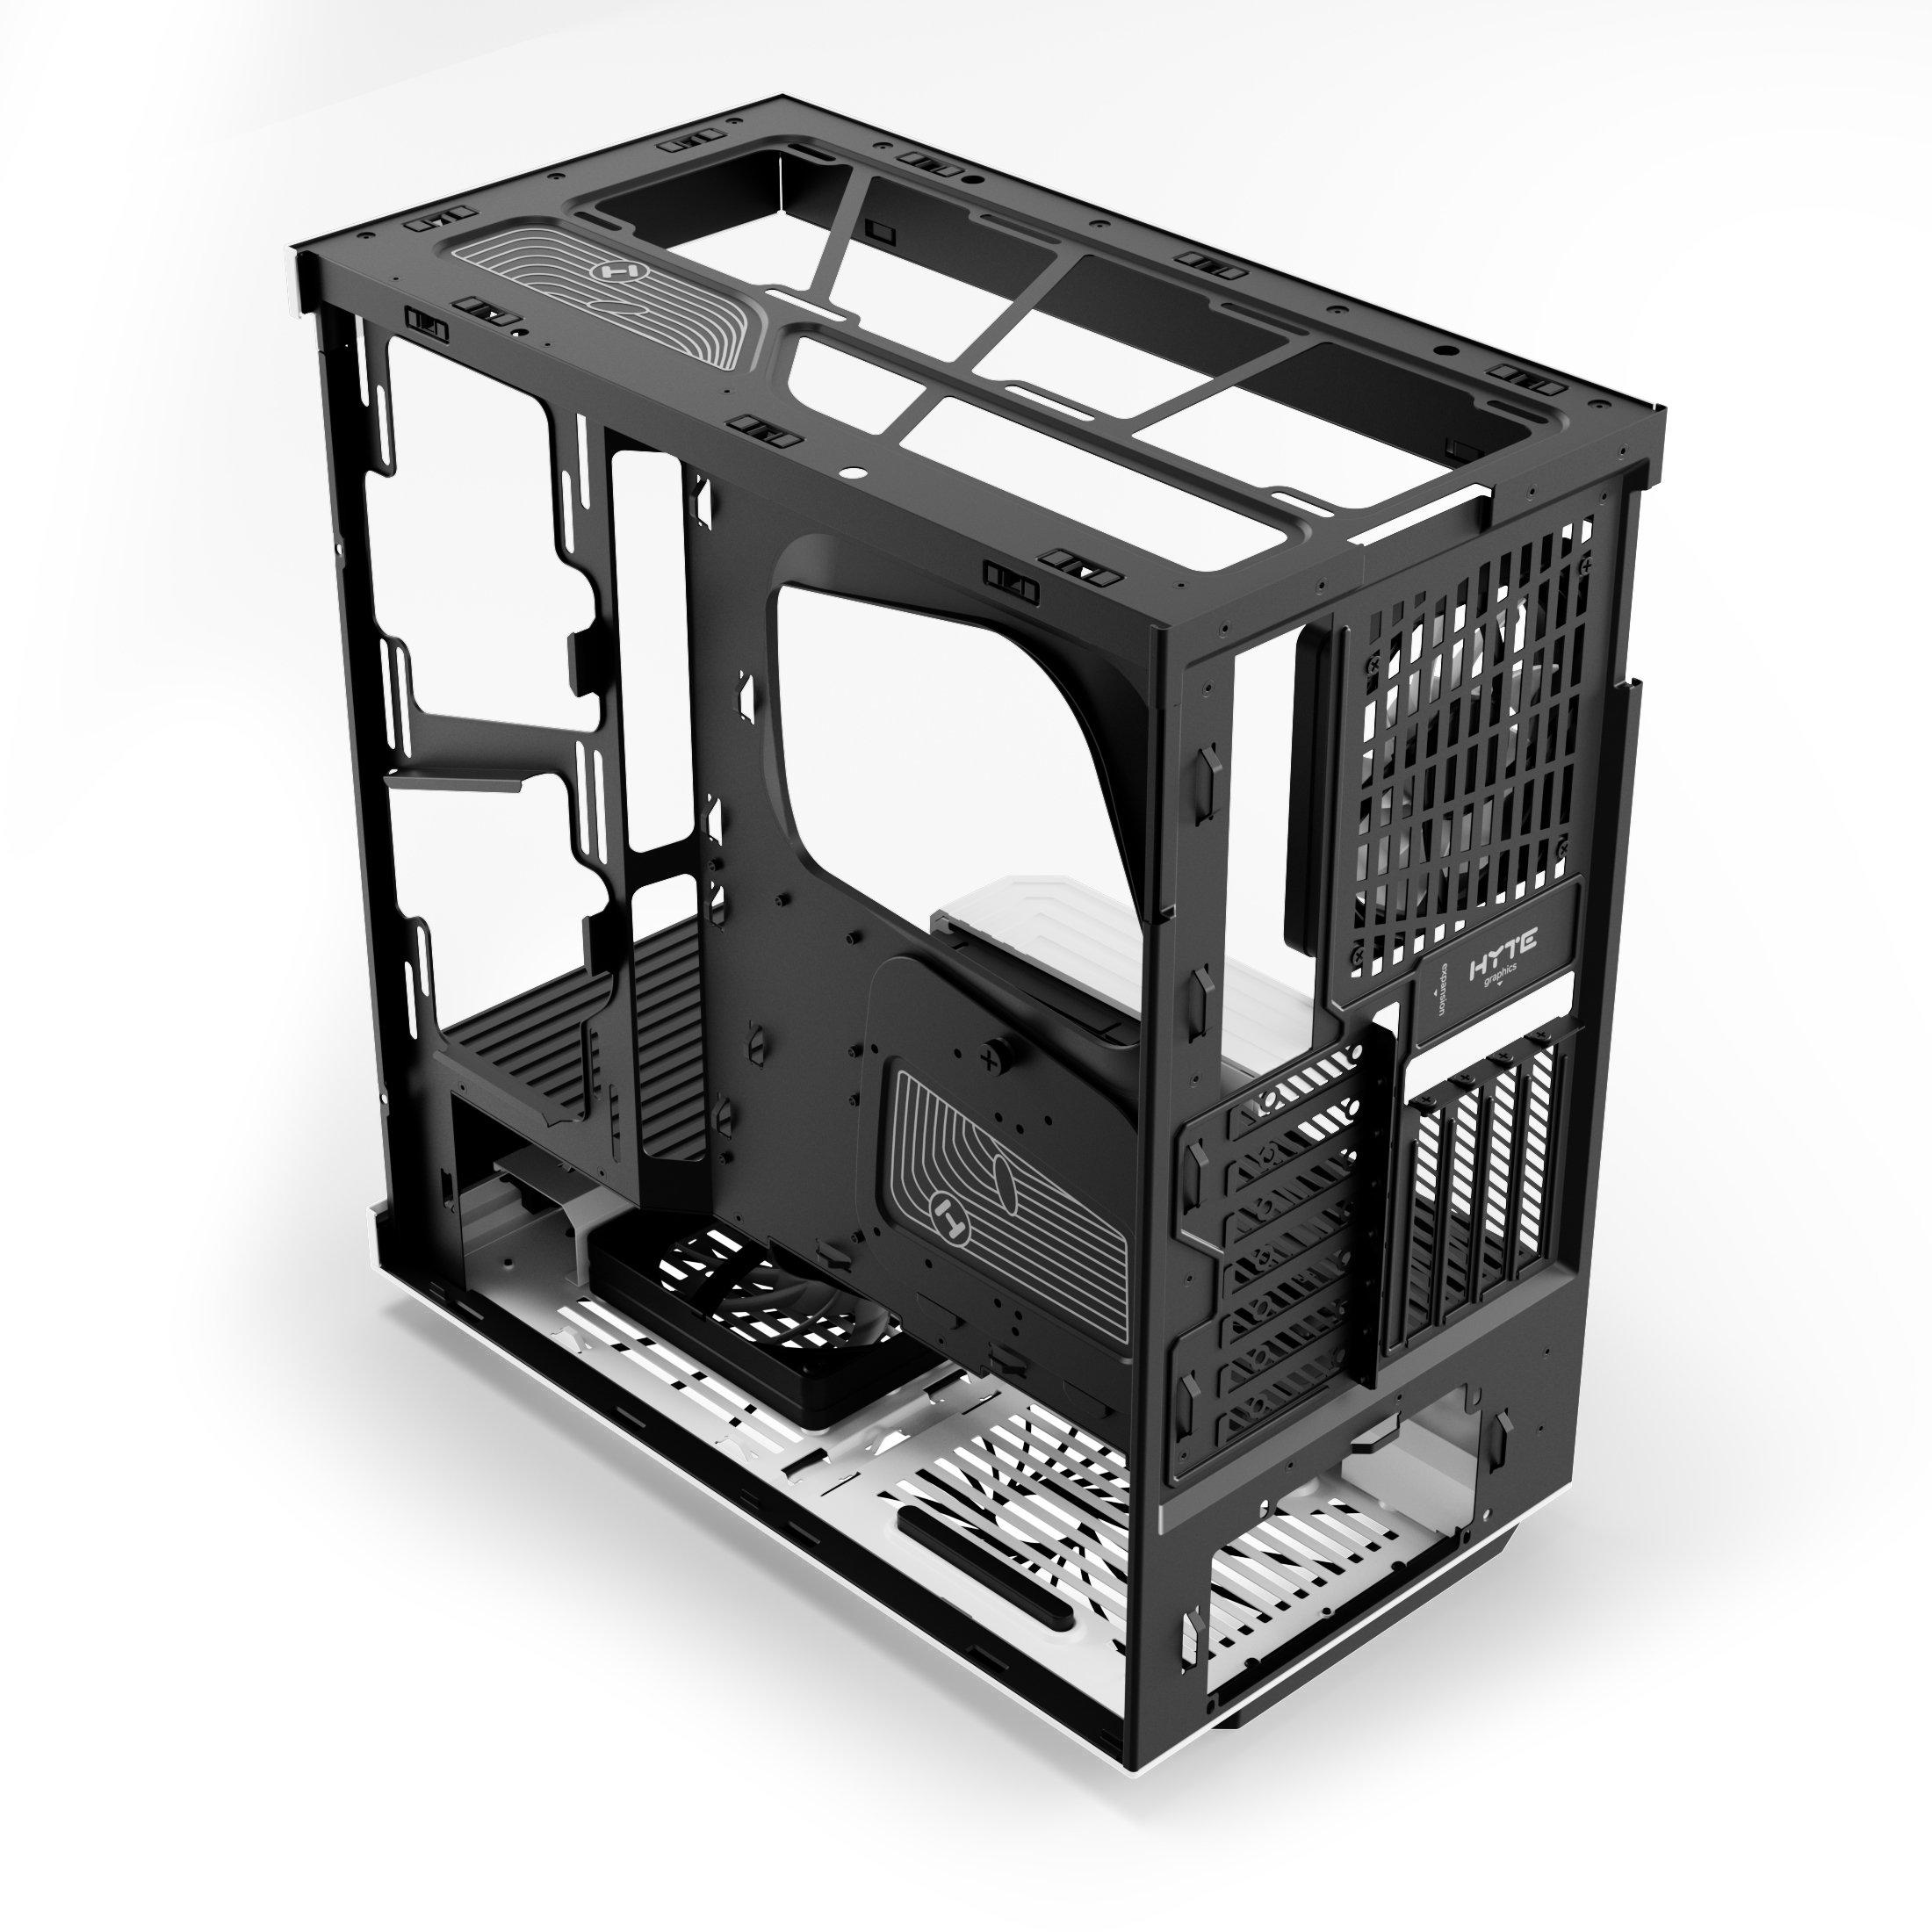 Hyte's new Y40 PC case brings its wraparound glass to a more